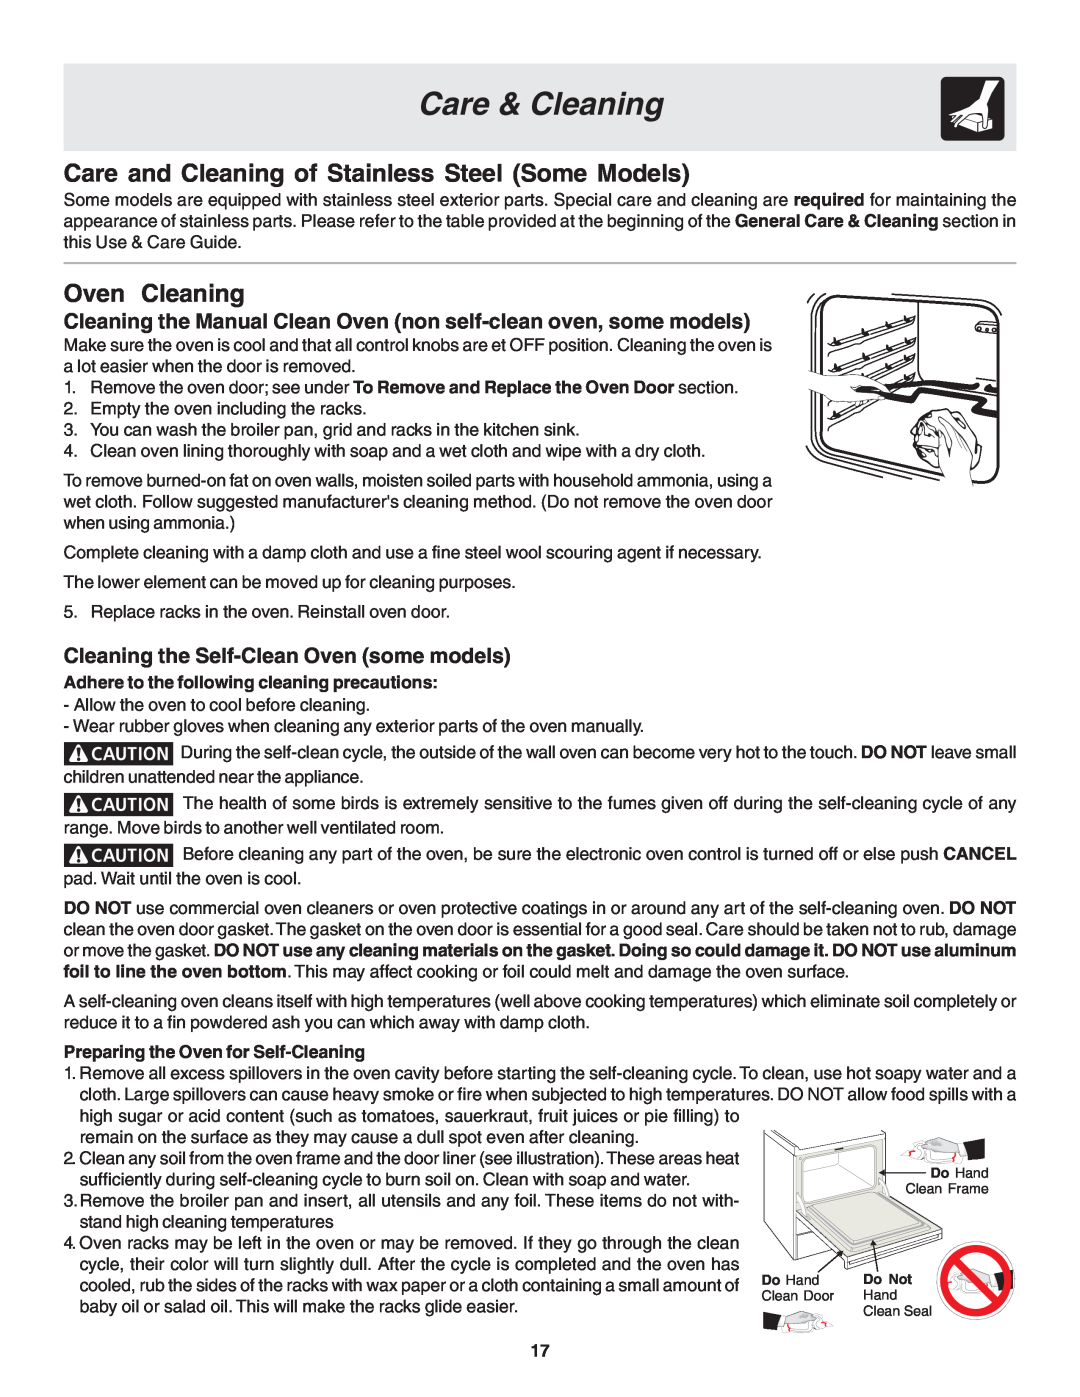 Frigidaire 318200439 Care & Cleaning, Cleaning the Manual Clean Oven non self-clean oven, some models 